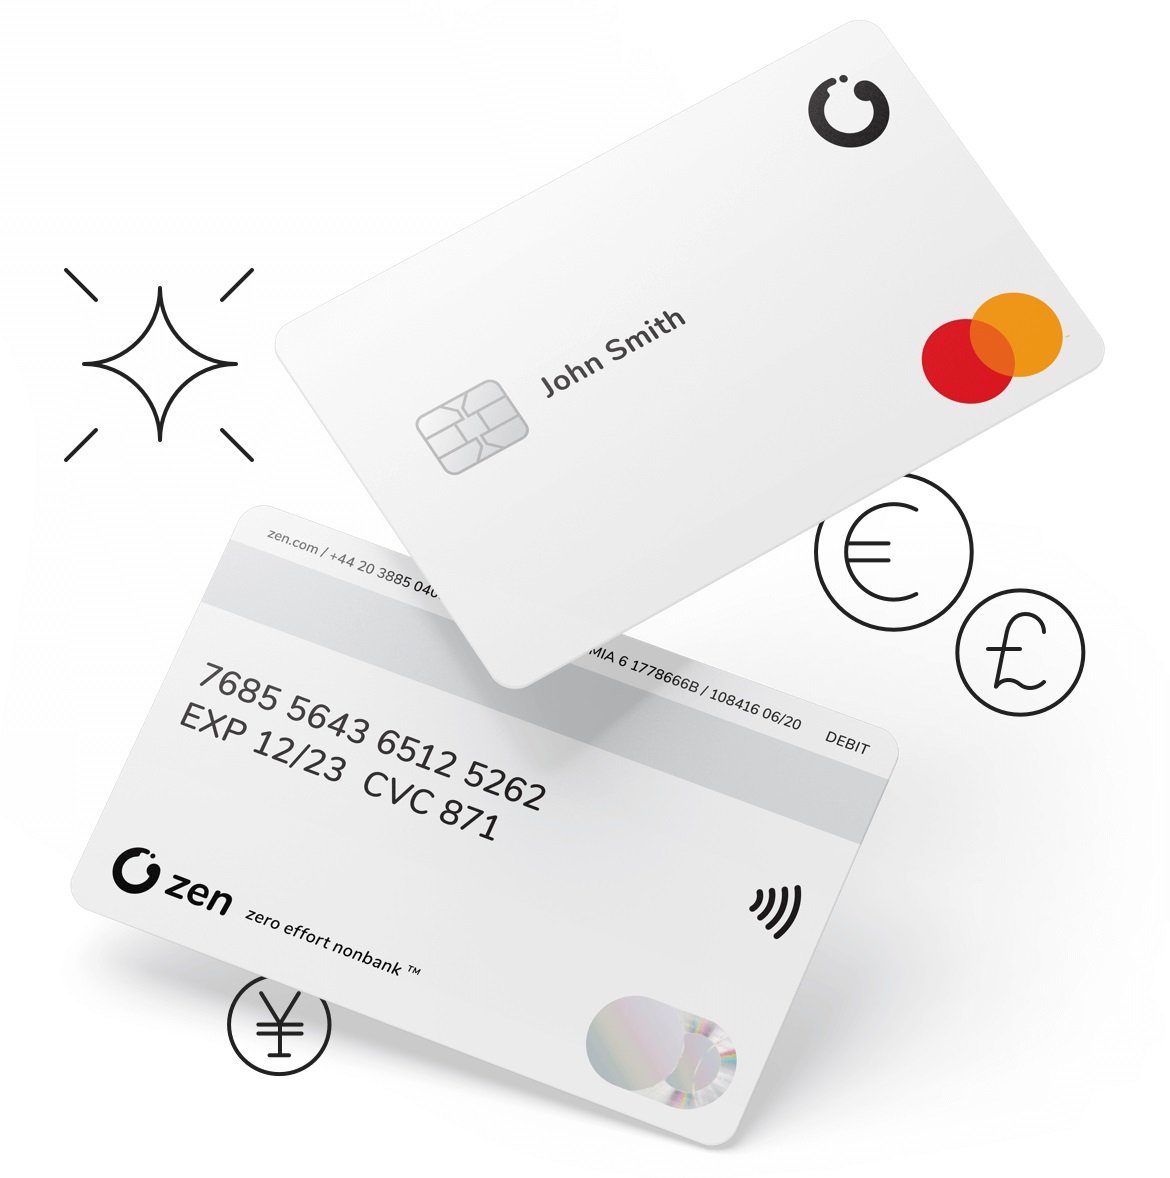 ZEN: The ideal payment card to develop your business